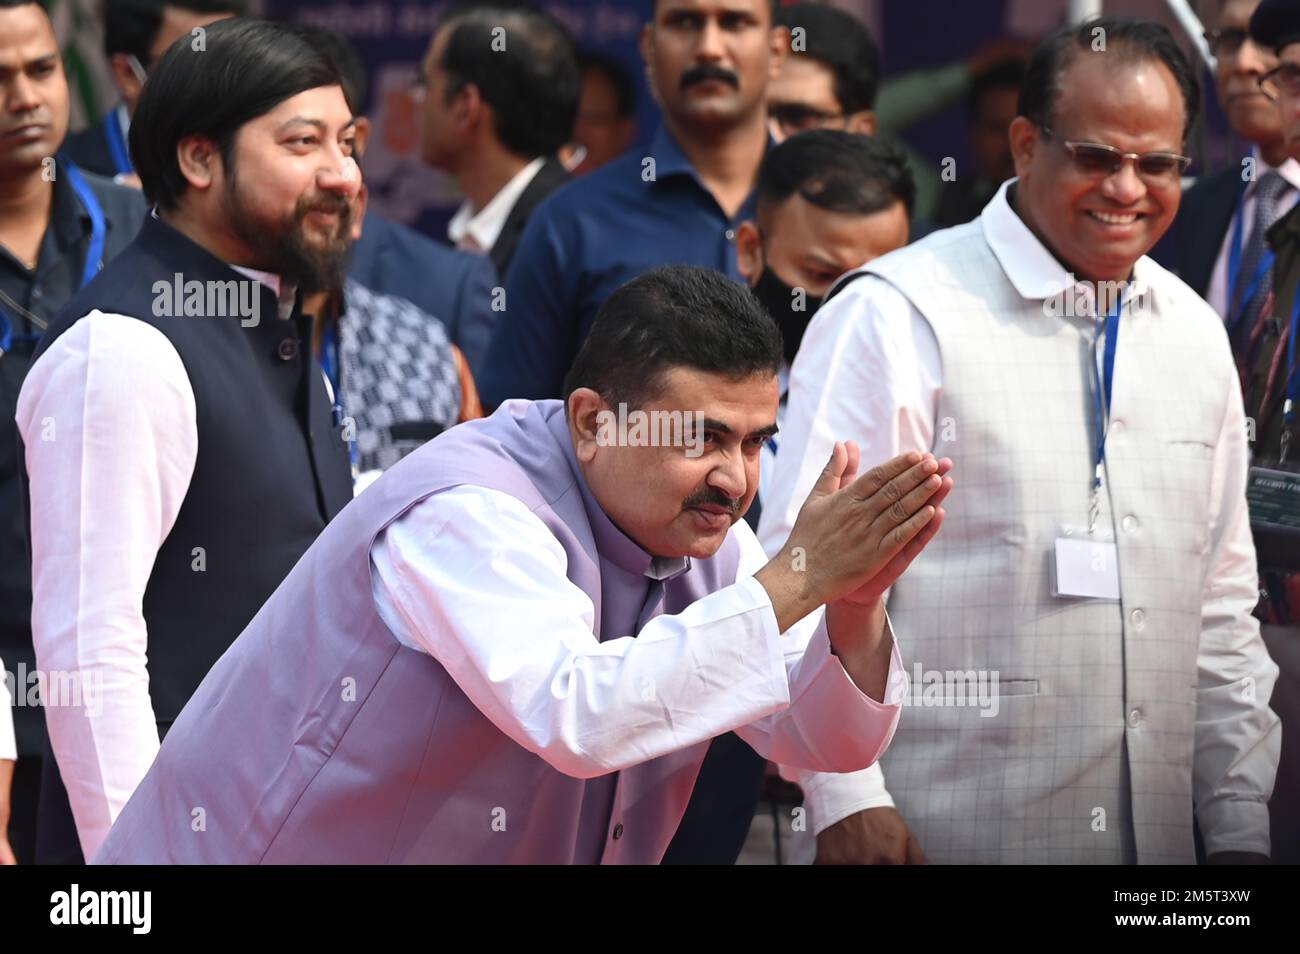 KOLKATA, INDIA - DECEMBER 30: BJP leader Subhendu Adhikari greets delegates delegates after flags off Vande Bharat Express Train from Howrah station at Howrah station on December 30, 2022 in Kolkata, India. Soon after performing the last rites of his mother Heeraben in Ahmedabad, Prime Minister Narendra Modi attended pre-planned developmental works including flagging off Vande Bharat Express connecting Howrah to New Jalpaiguri, in West Bengal, via video conferencing. This is West Bengal's first and the country's seventh Vande Bharat train to be launched. (Photo by Samir Jana/Hindustan Times/Si Stock Photo